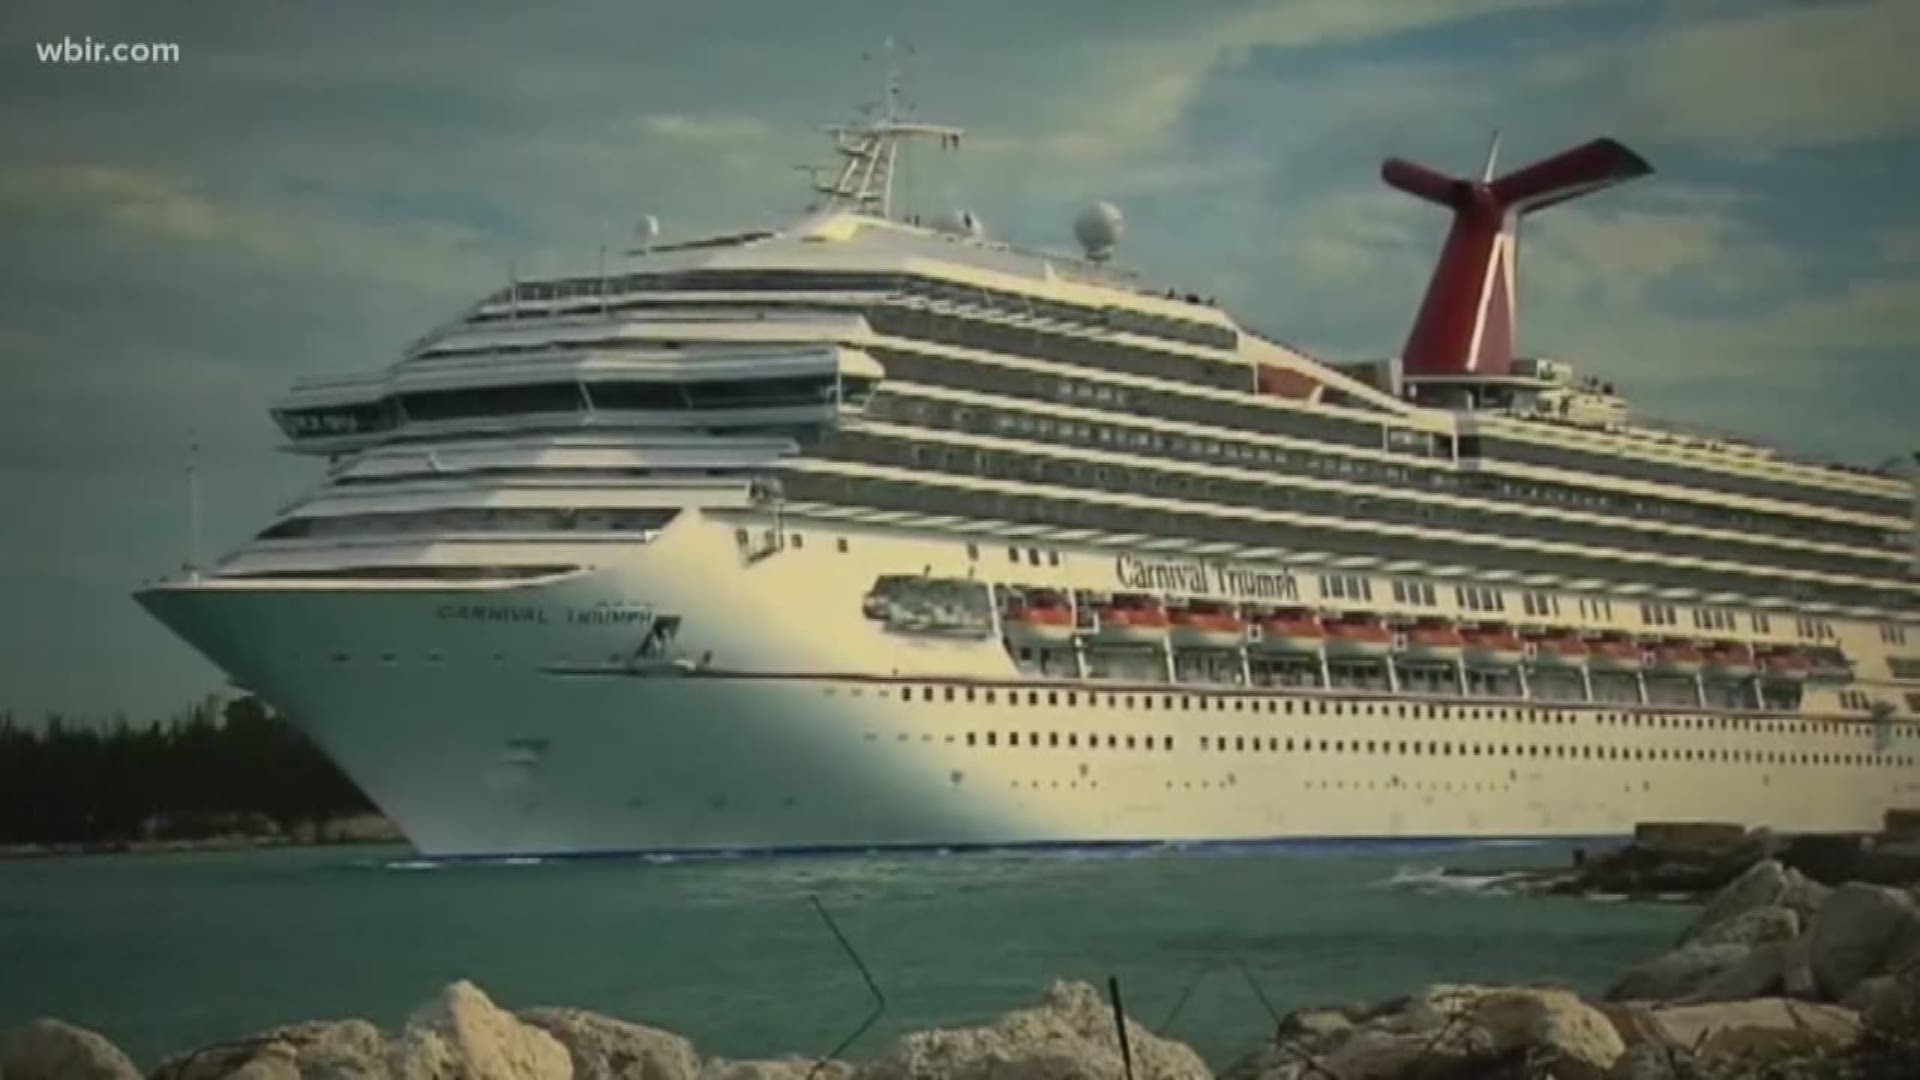 Couple Discovers Hidden Camera On Carnival Cruise 